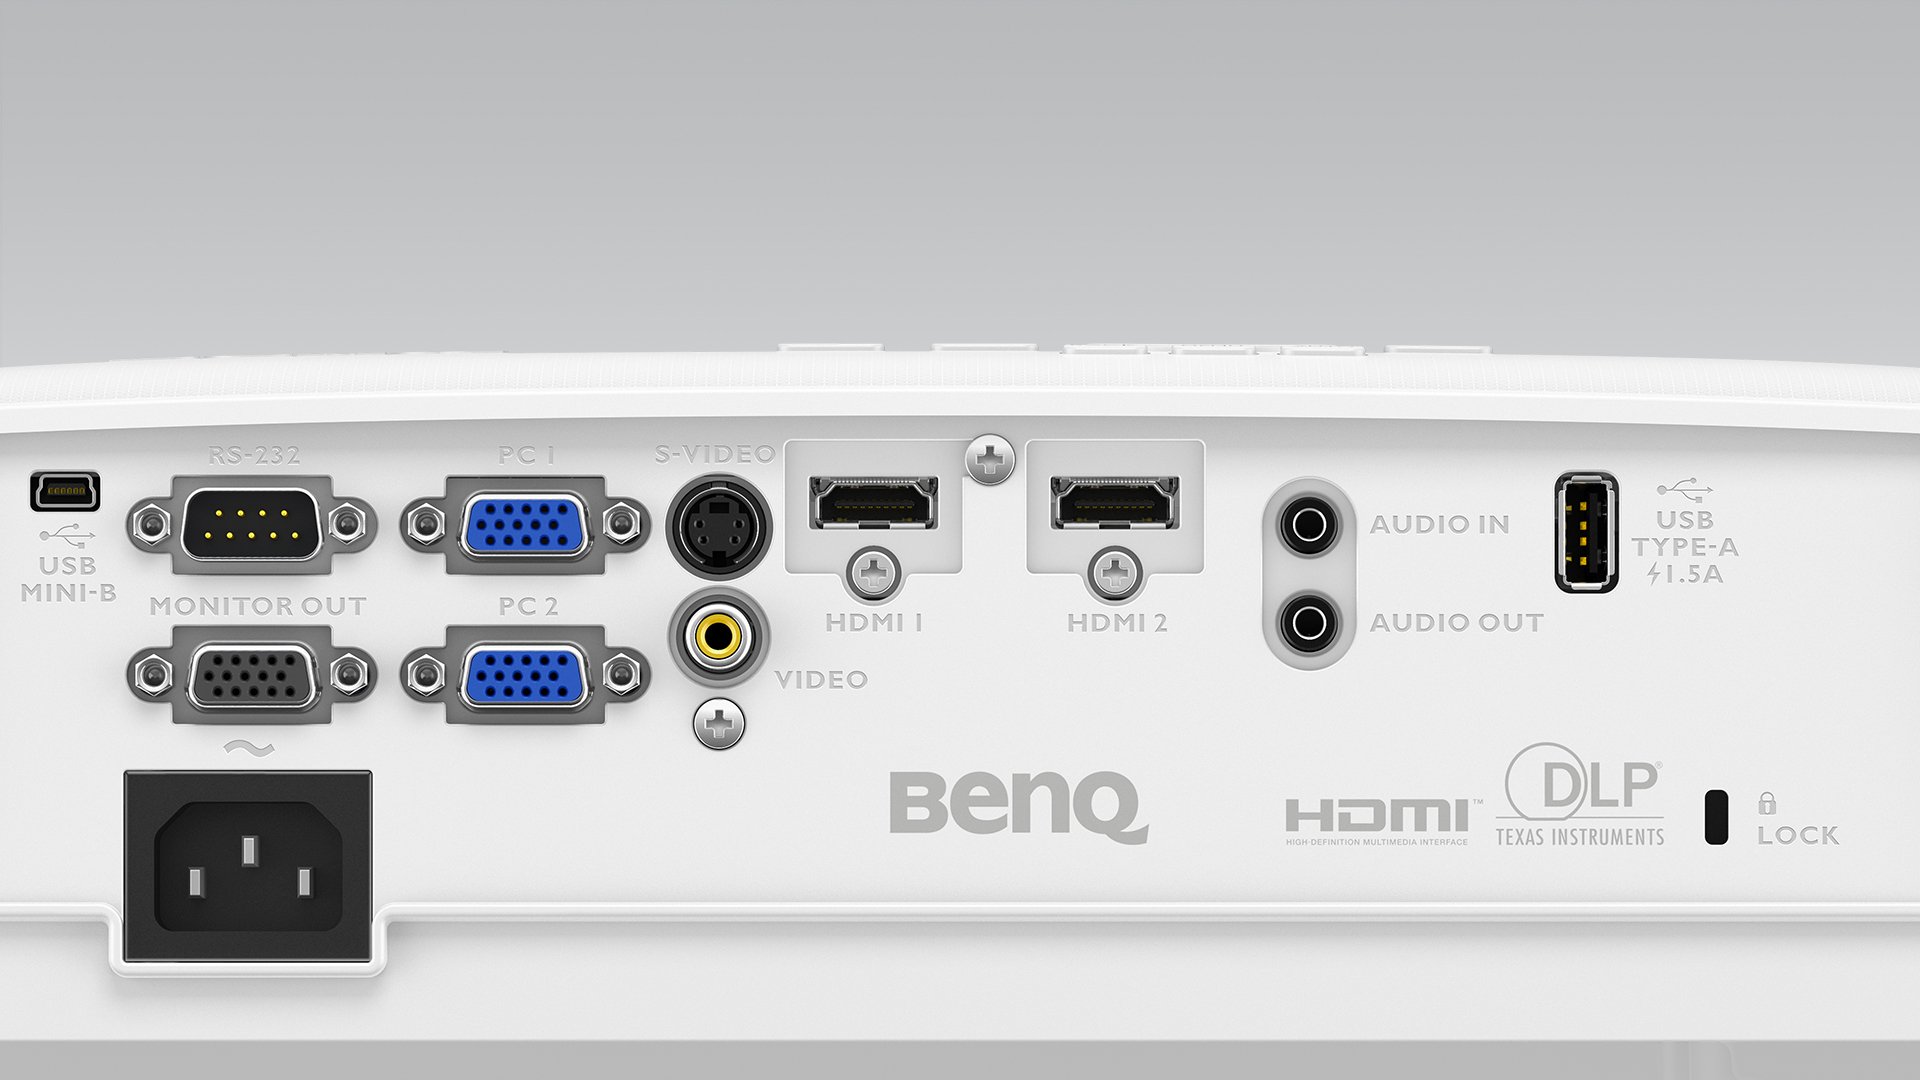 BenQ MS536 io port is with reliable transmission and versatile connectivity